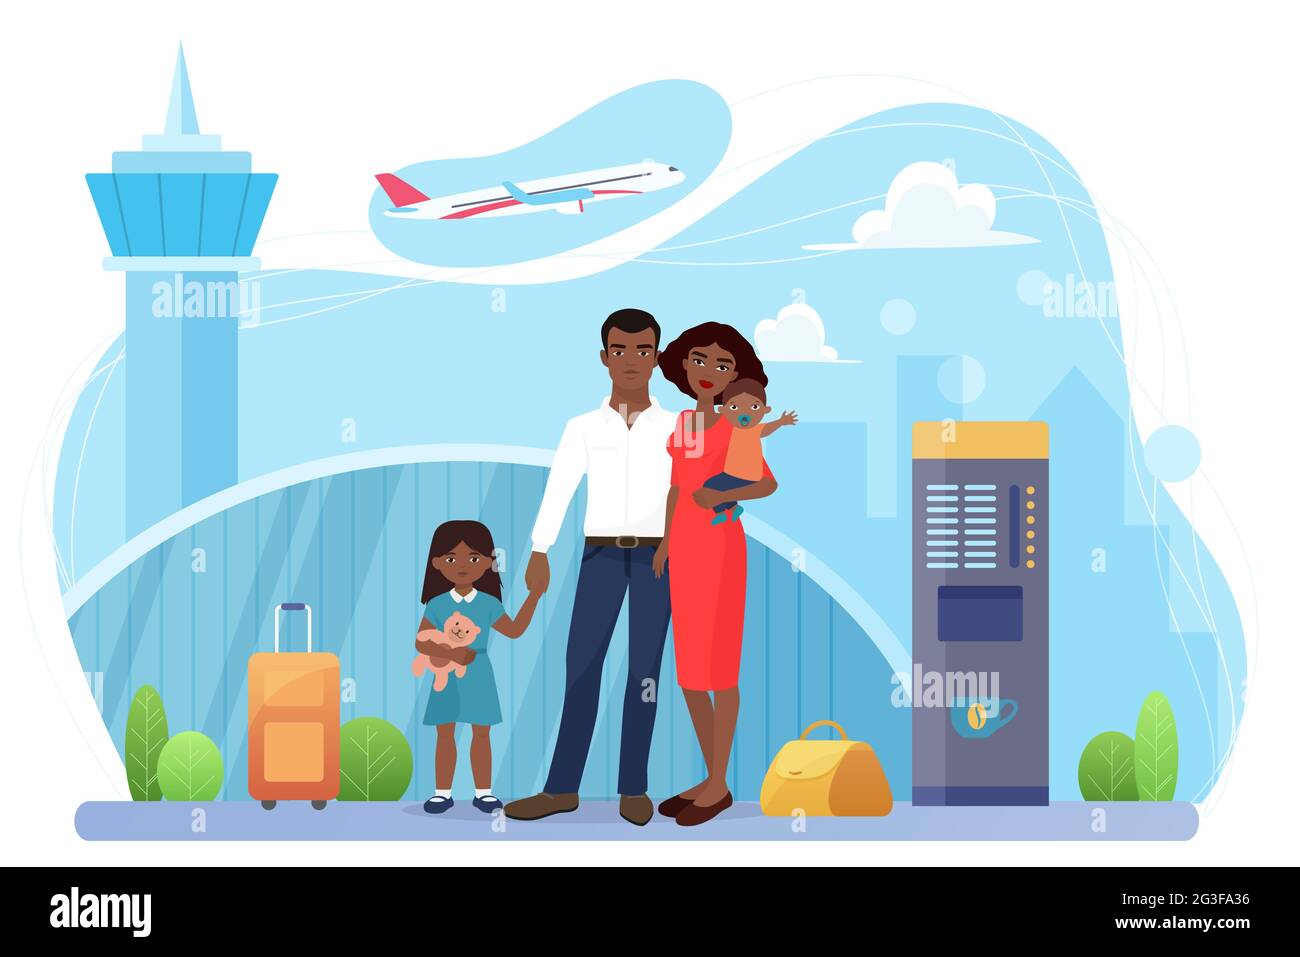 Family people travel, airline transportation vector illustration. Cartoon passenger mother father and children characters standing together in airport terminal, ready to fly by plane isolated on white Stock Vector